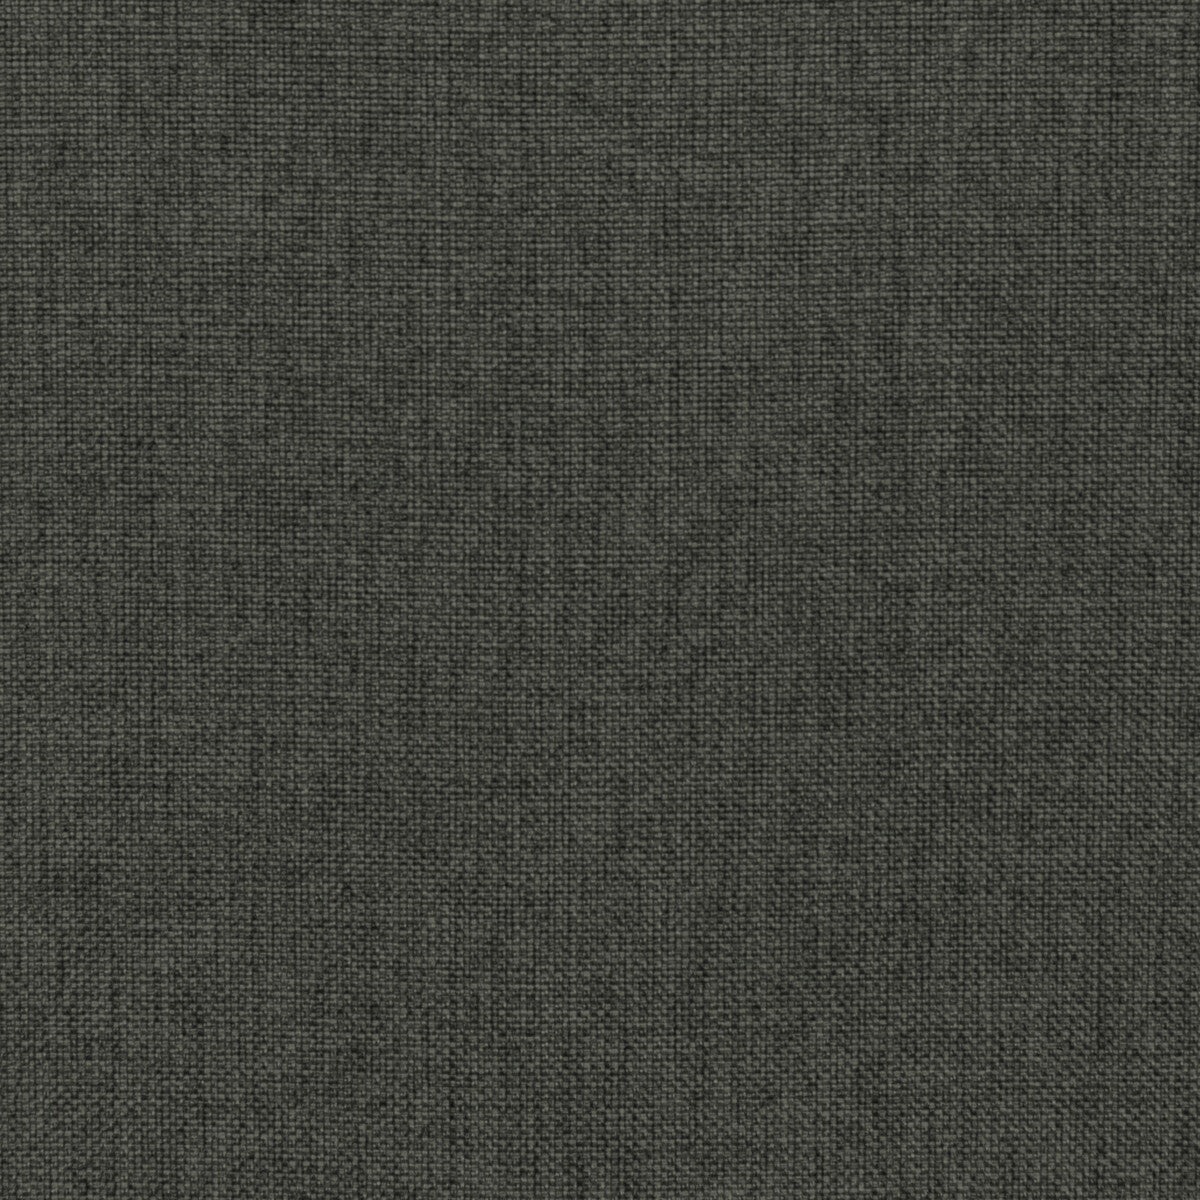 Fortify fabric in nickel color - pattern 36257.21.0 - by Kravet Contract in the Supreen collection